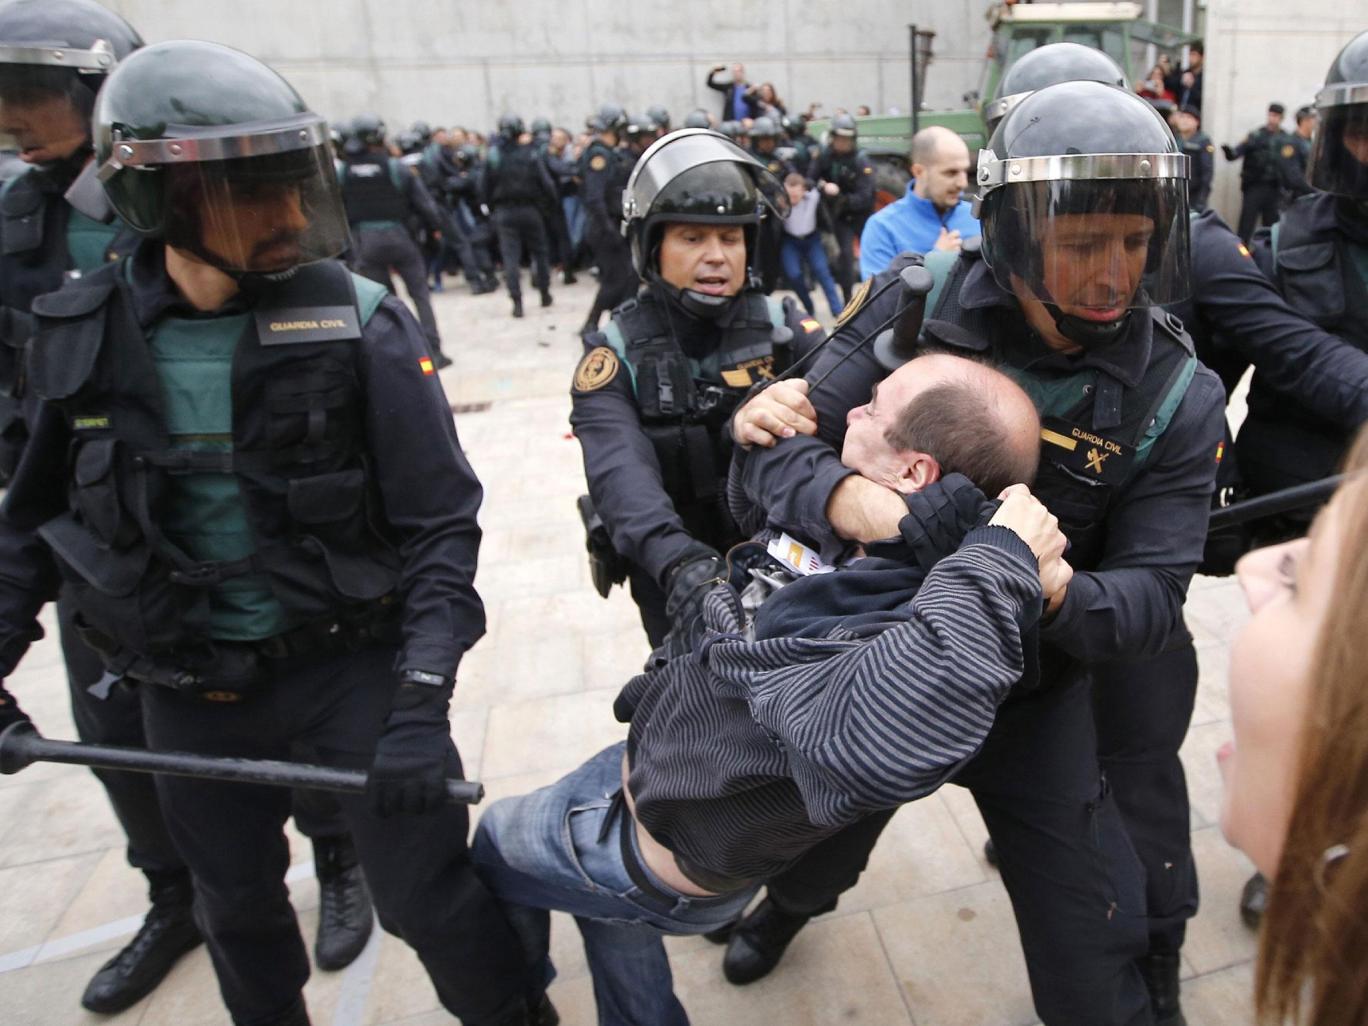 Spanish foreign minister claims photos of police brutality are “fake”